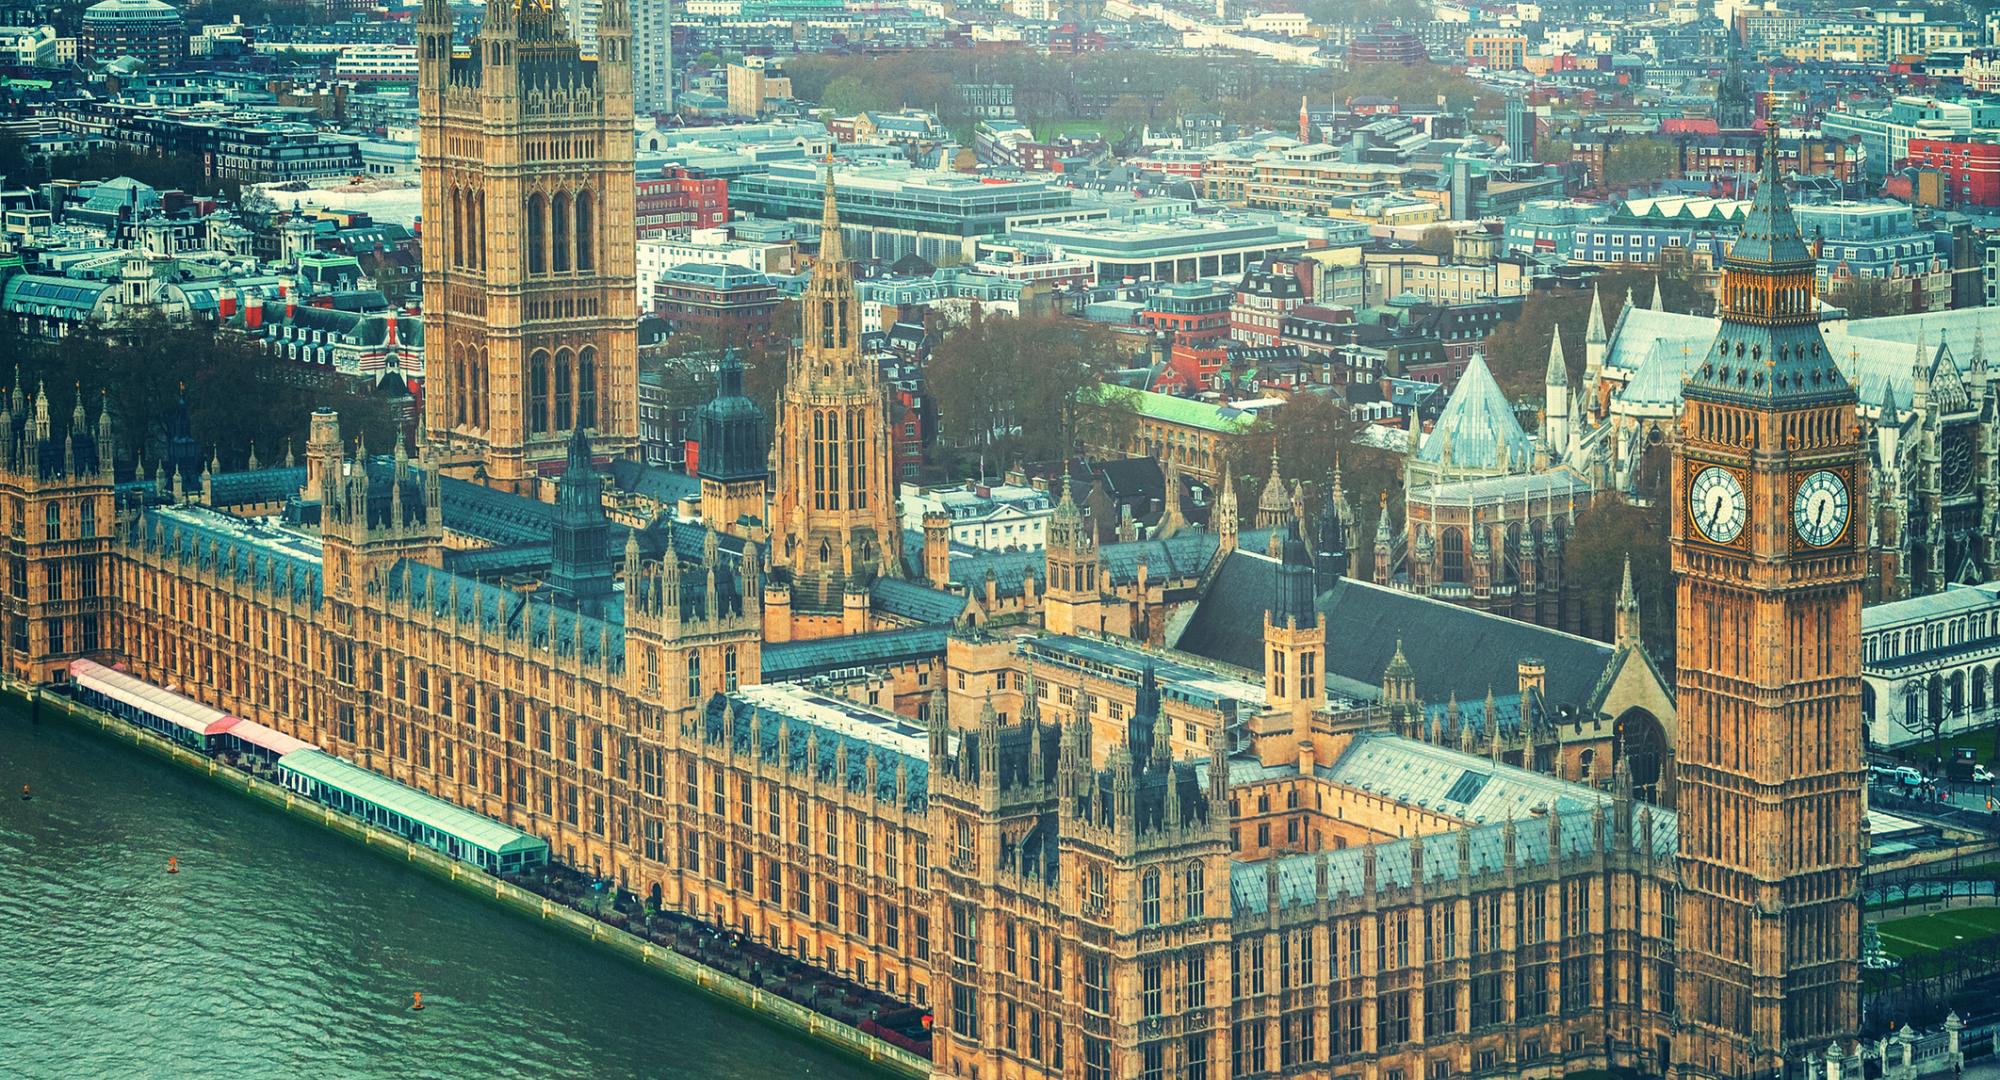 Big Ben and the House of Parliament in London taken from a drone.